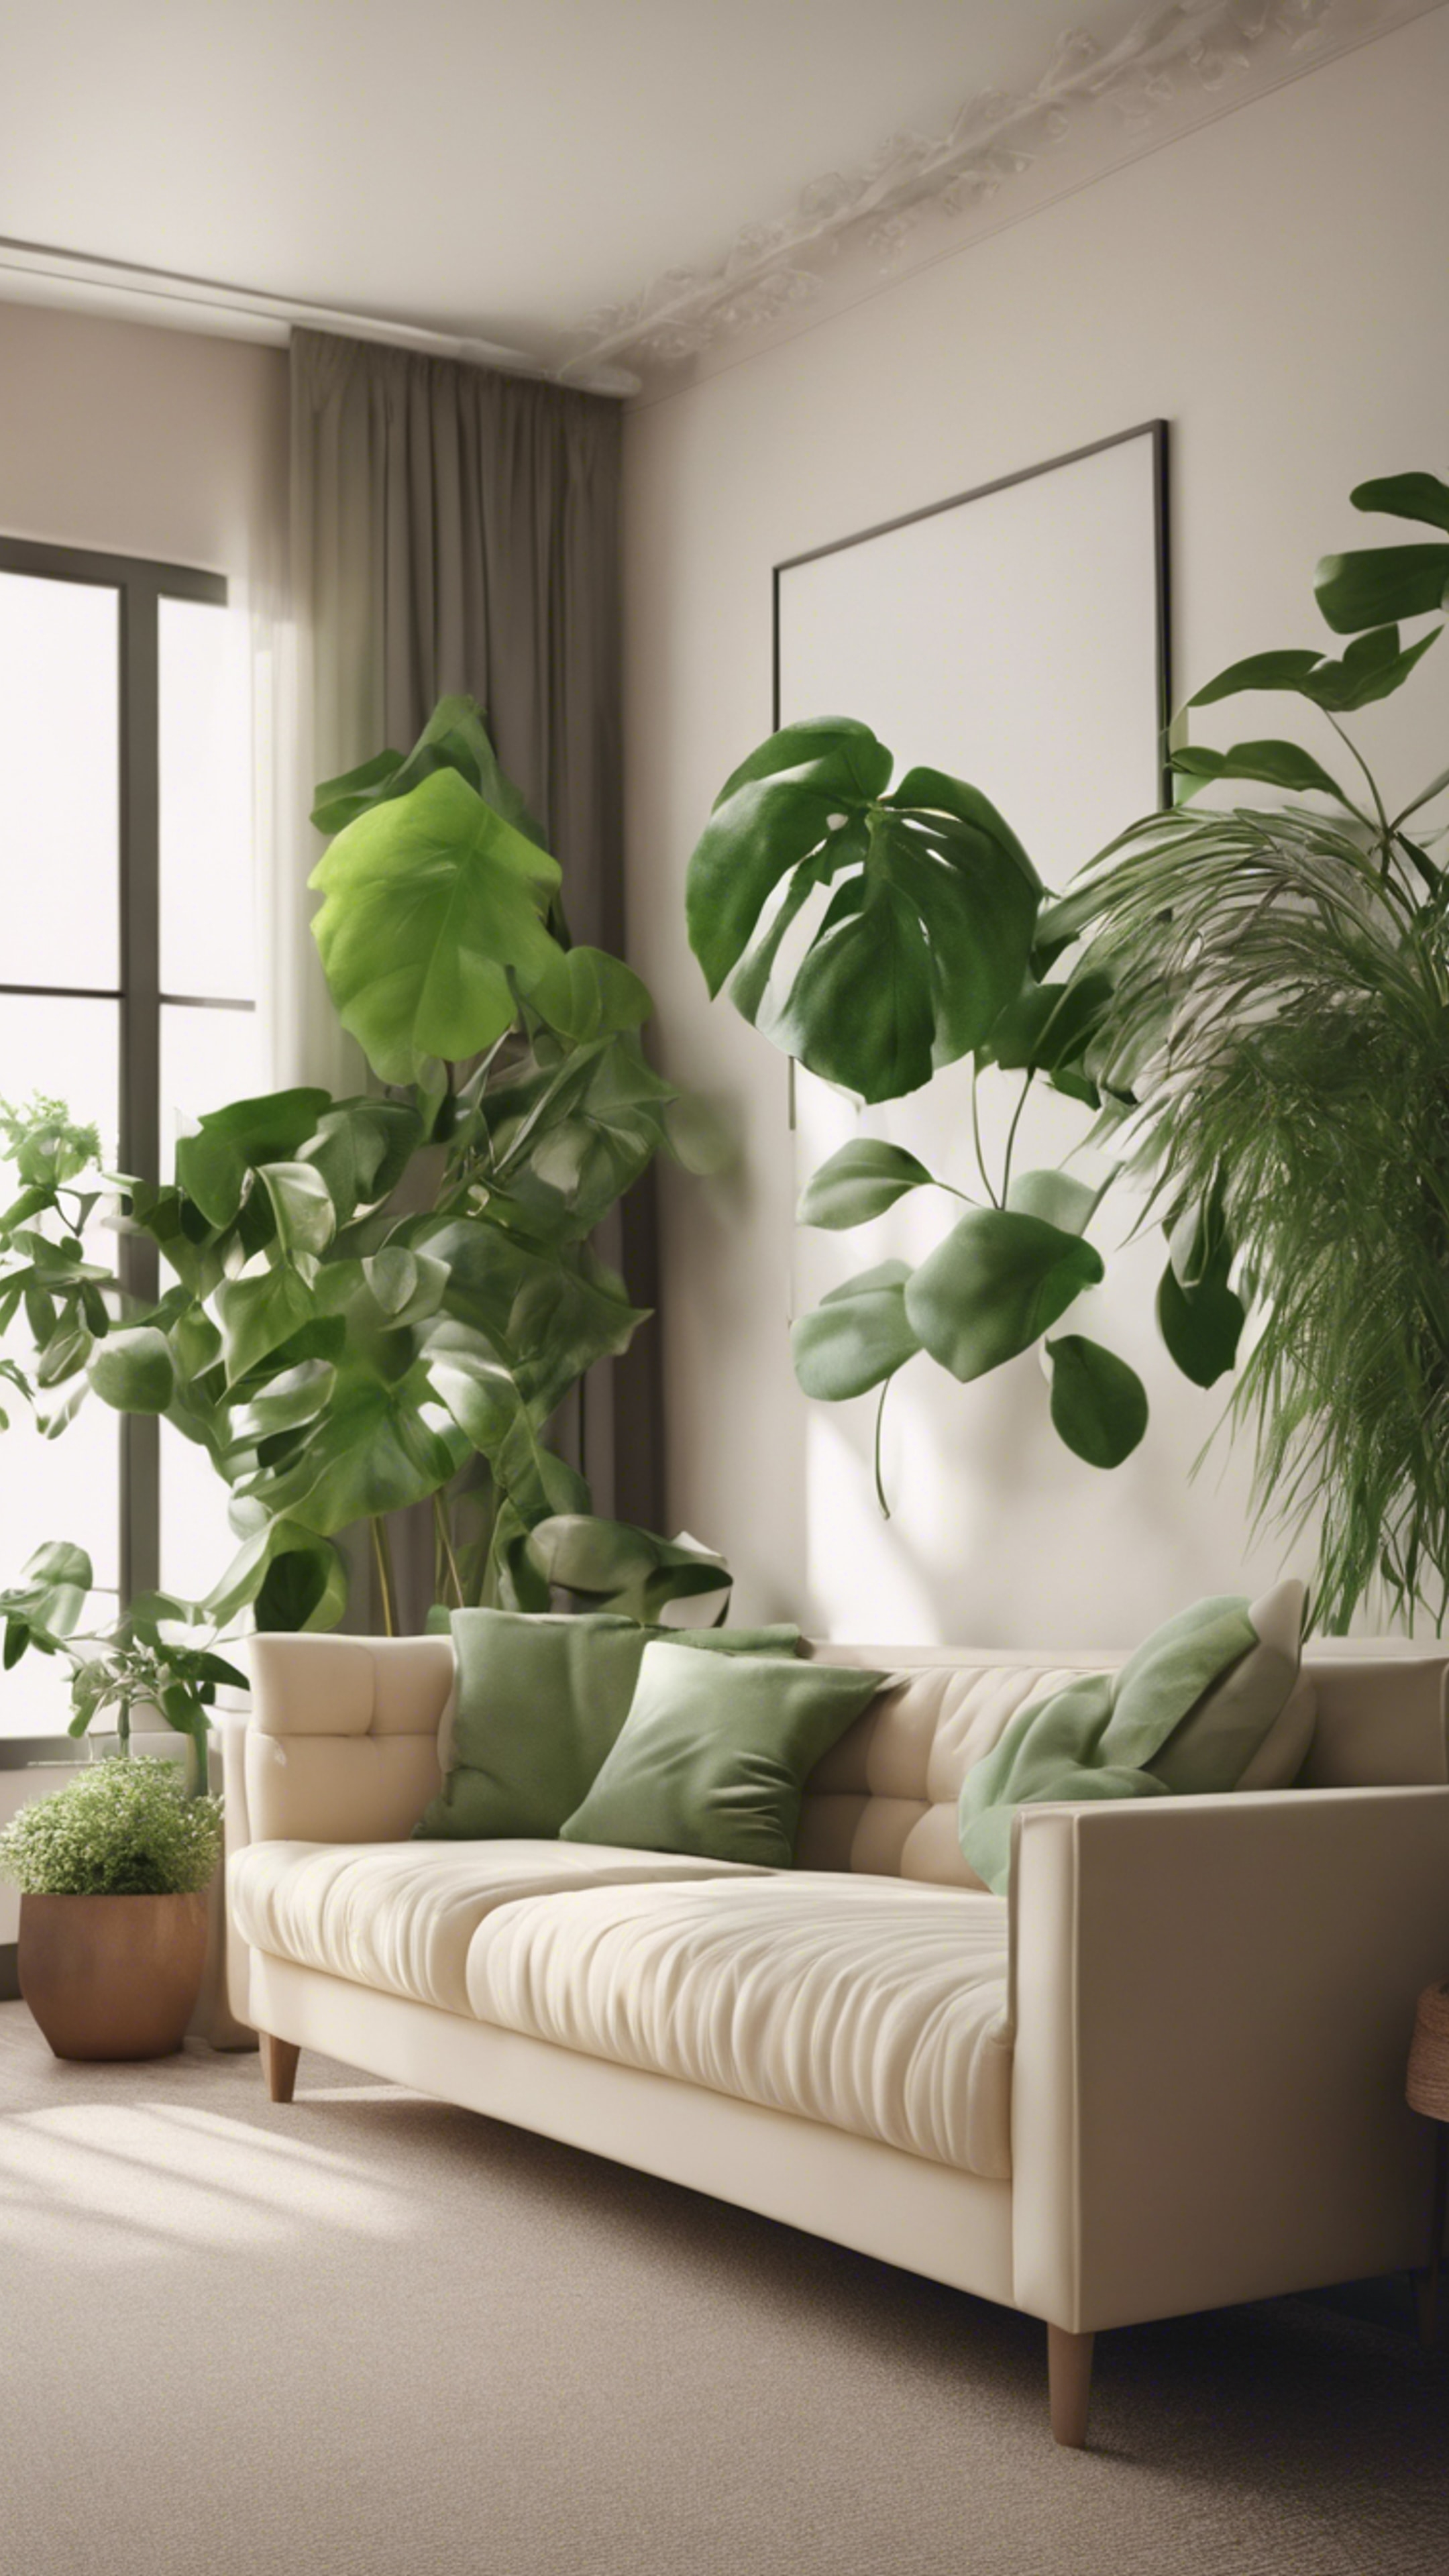 A simplistic living room featuring a cream couch contrasted with a natural green aesthetic of indoor plants Kertas dinding[57c4f329650745189cc4]